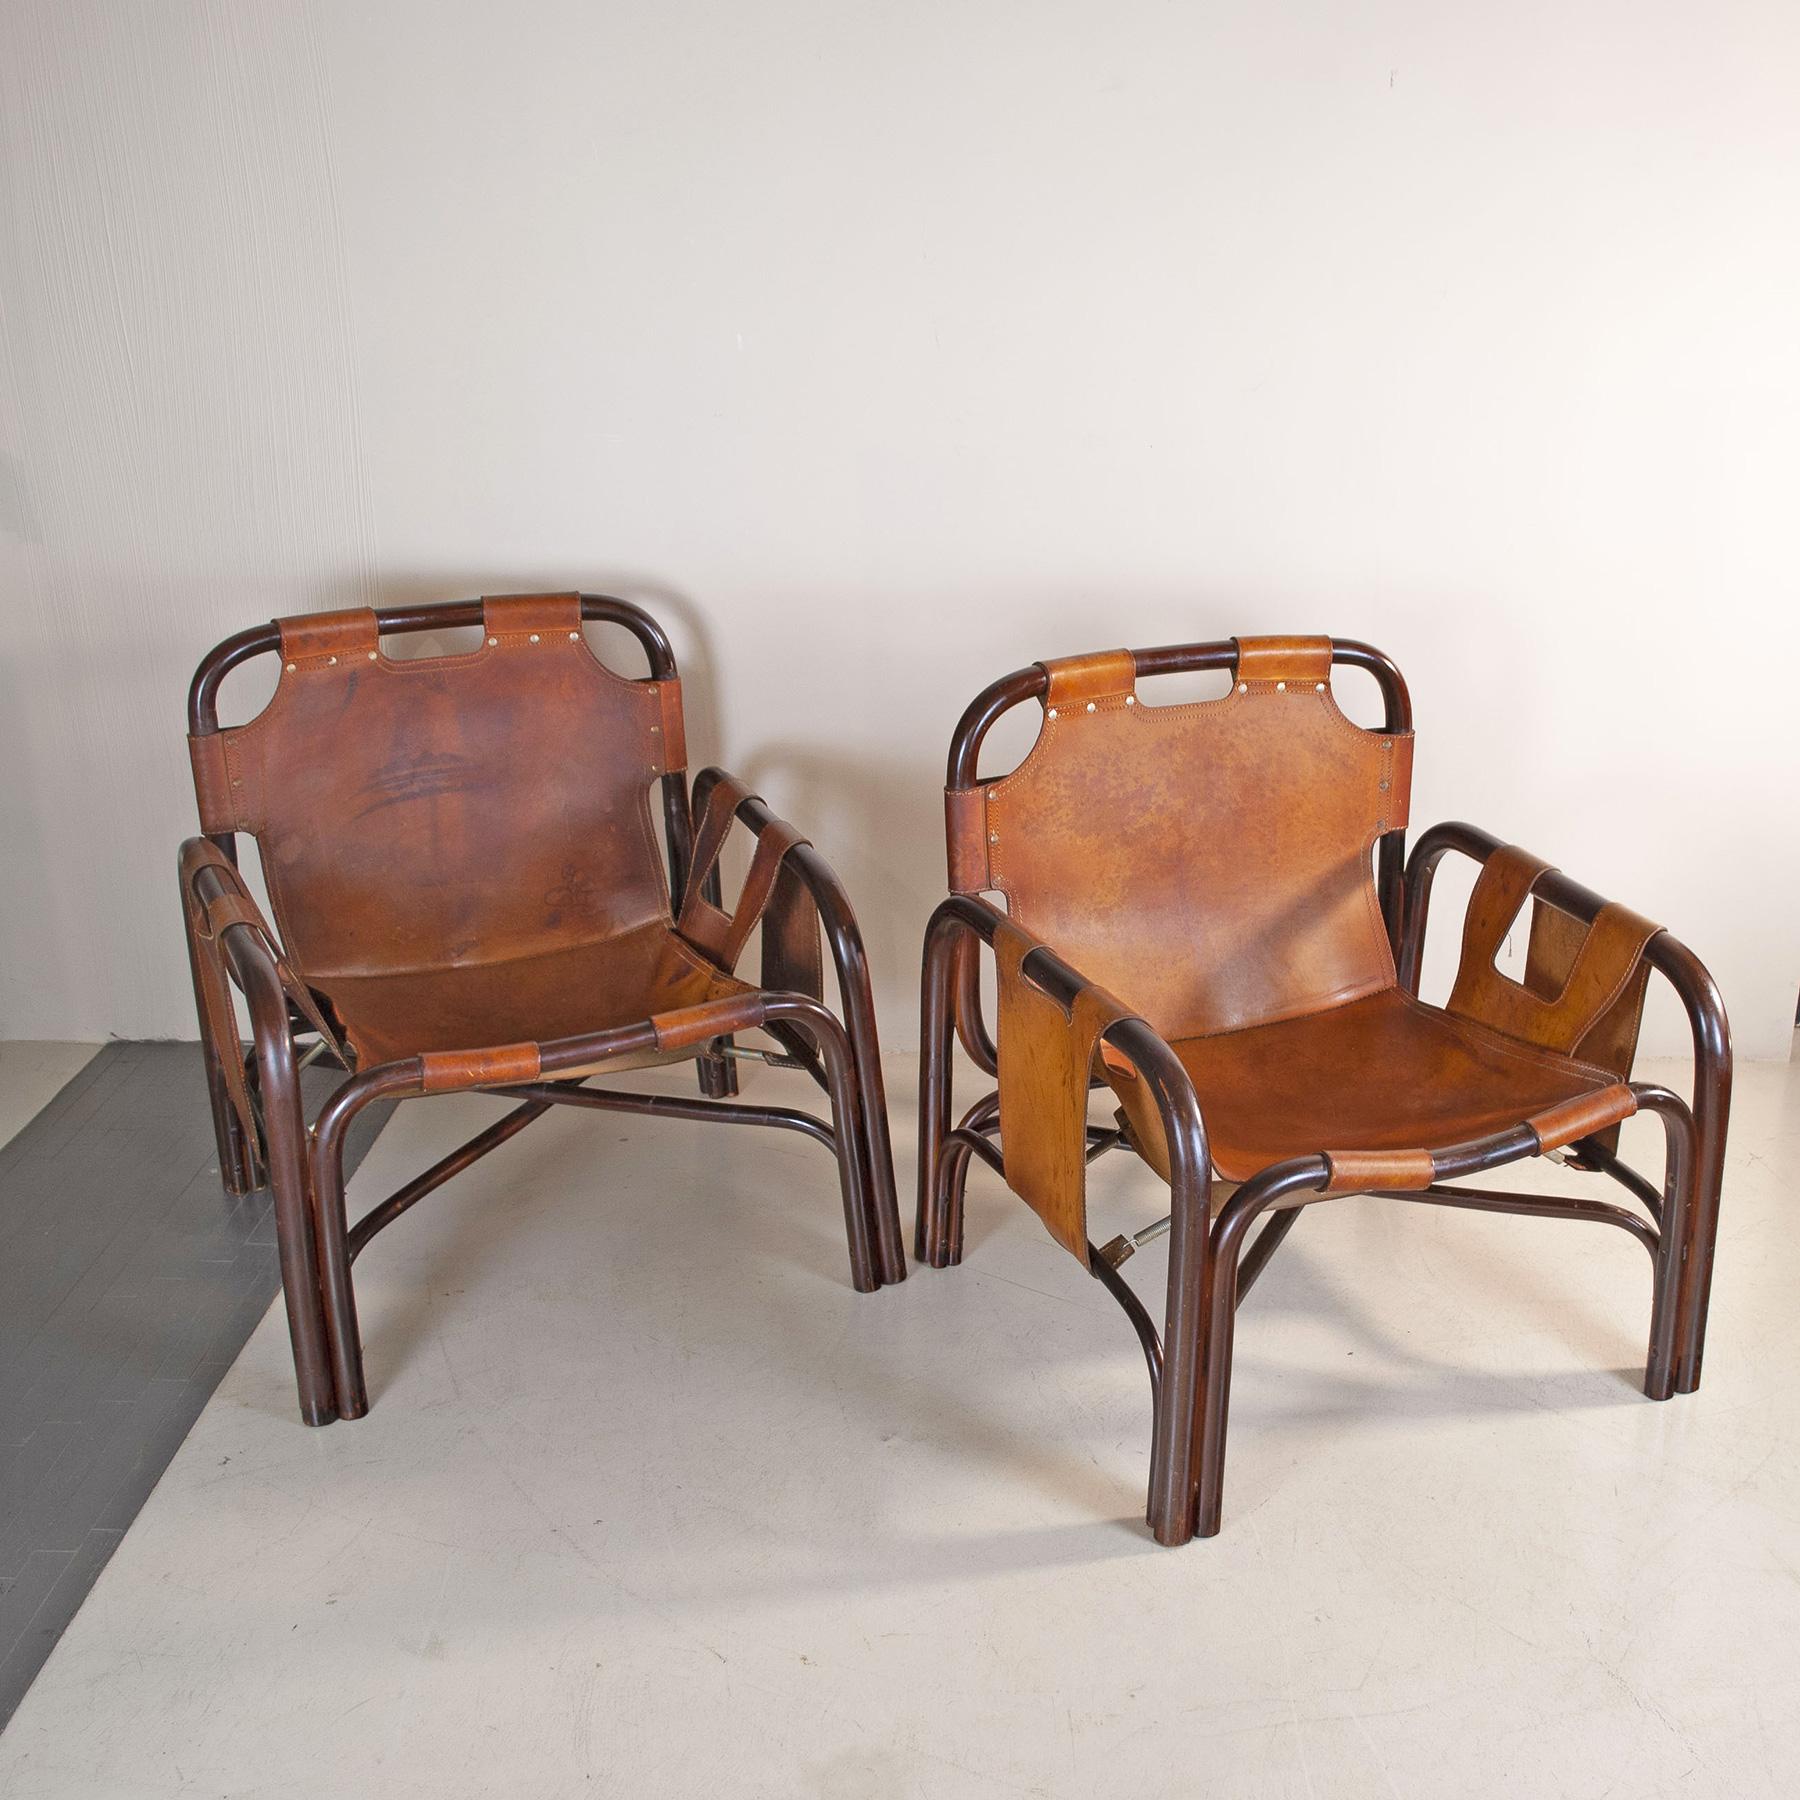 Tito Agnoli set of two bamboo cane armchairs 1960s For Sale 4